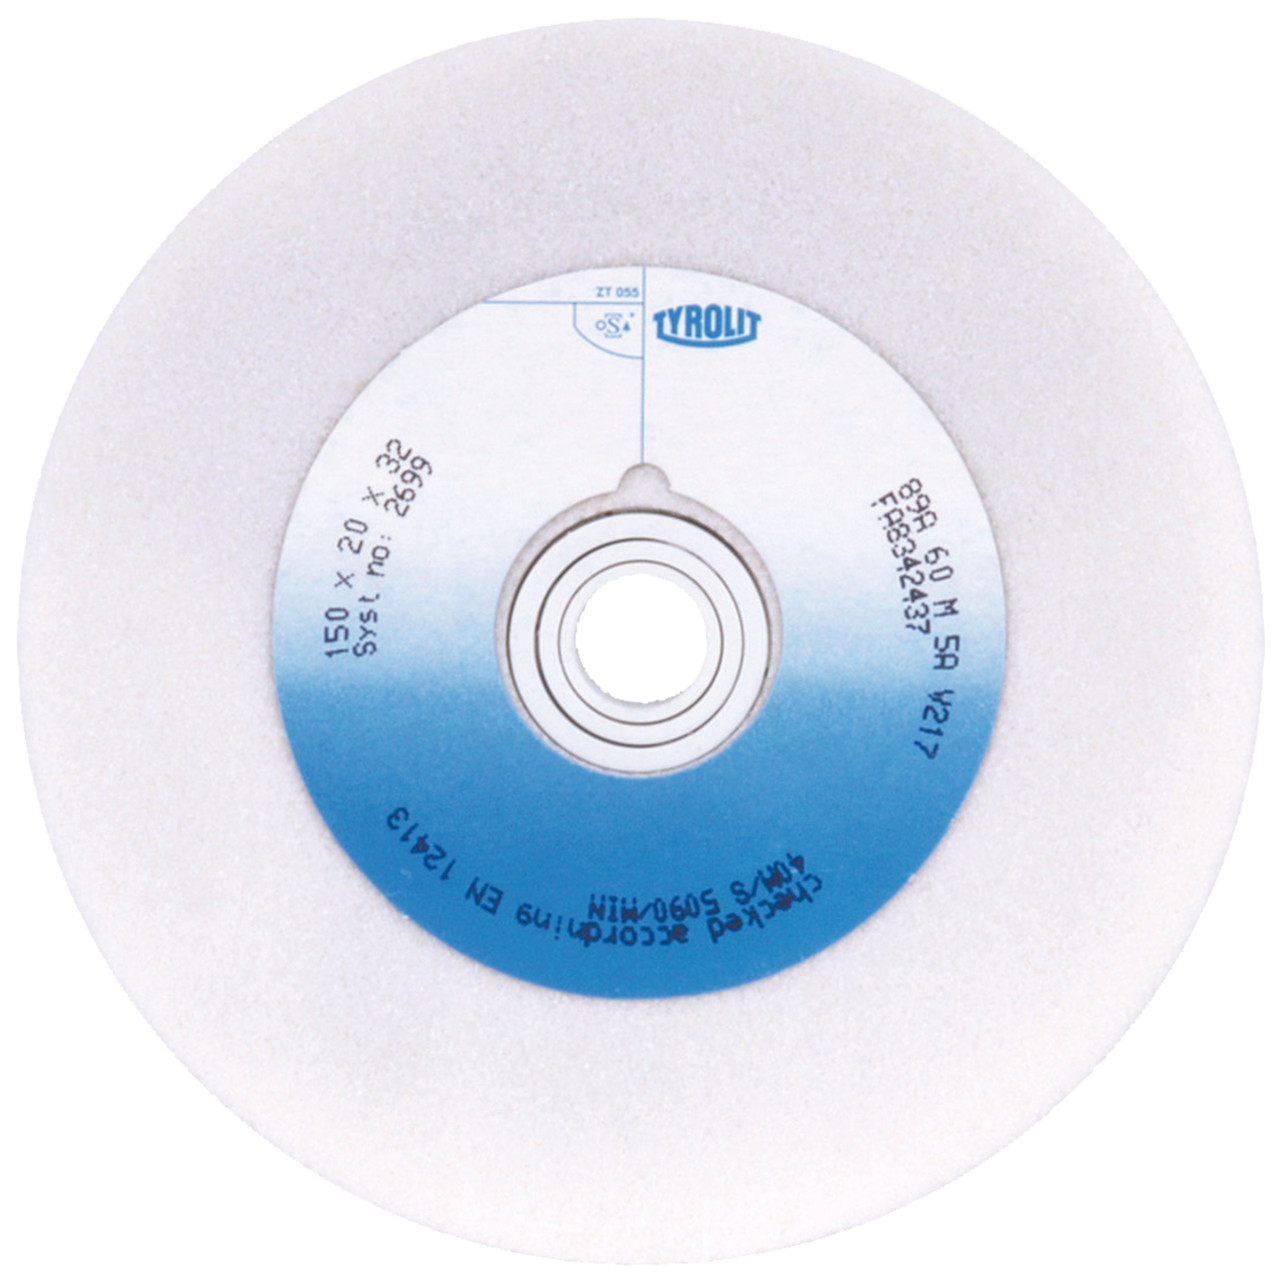 TYROLIT conventional ceramic grinding wheels DxDxH 175x20x32 For high-alloy steels and HSS, shape: 1, Art. 543615